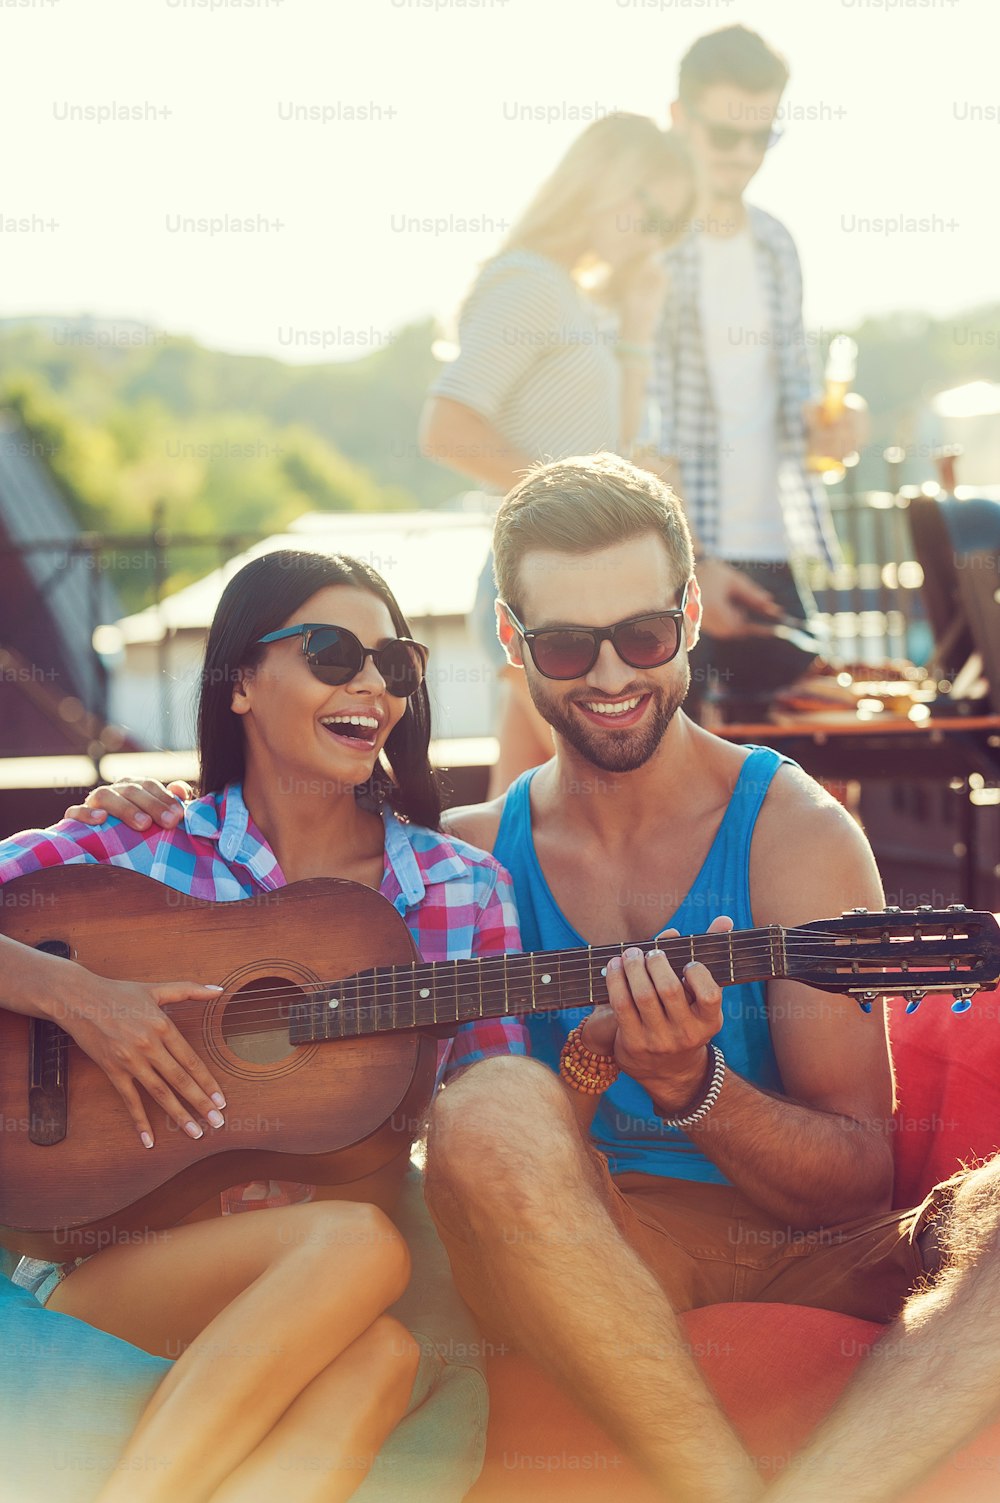 Joyful young man teaching his girlfriend to play the guitar while two people barbecuing in the background